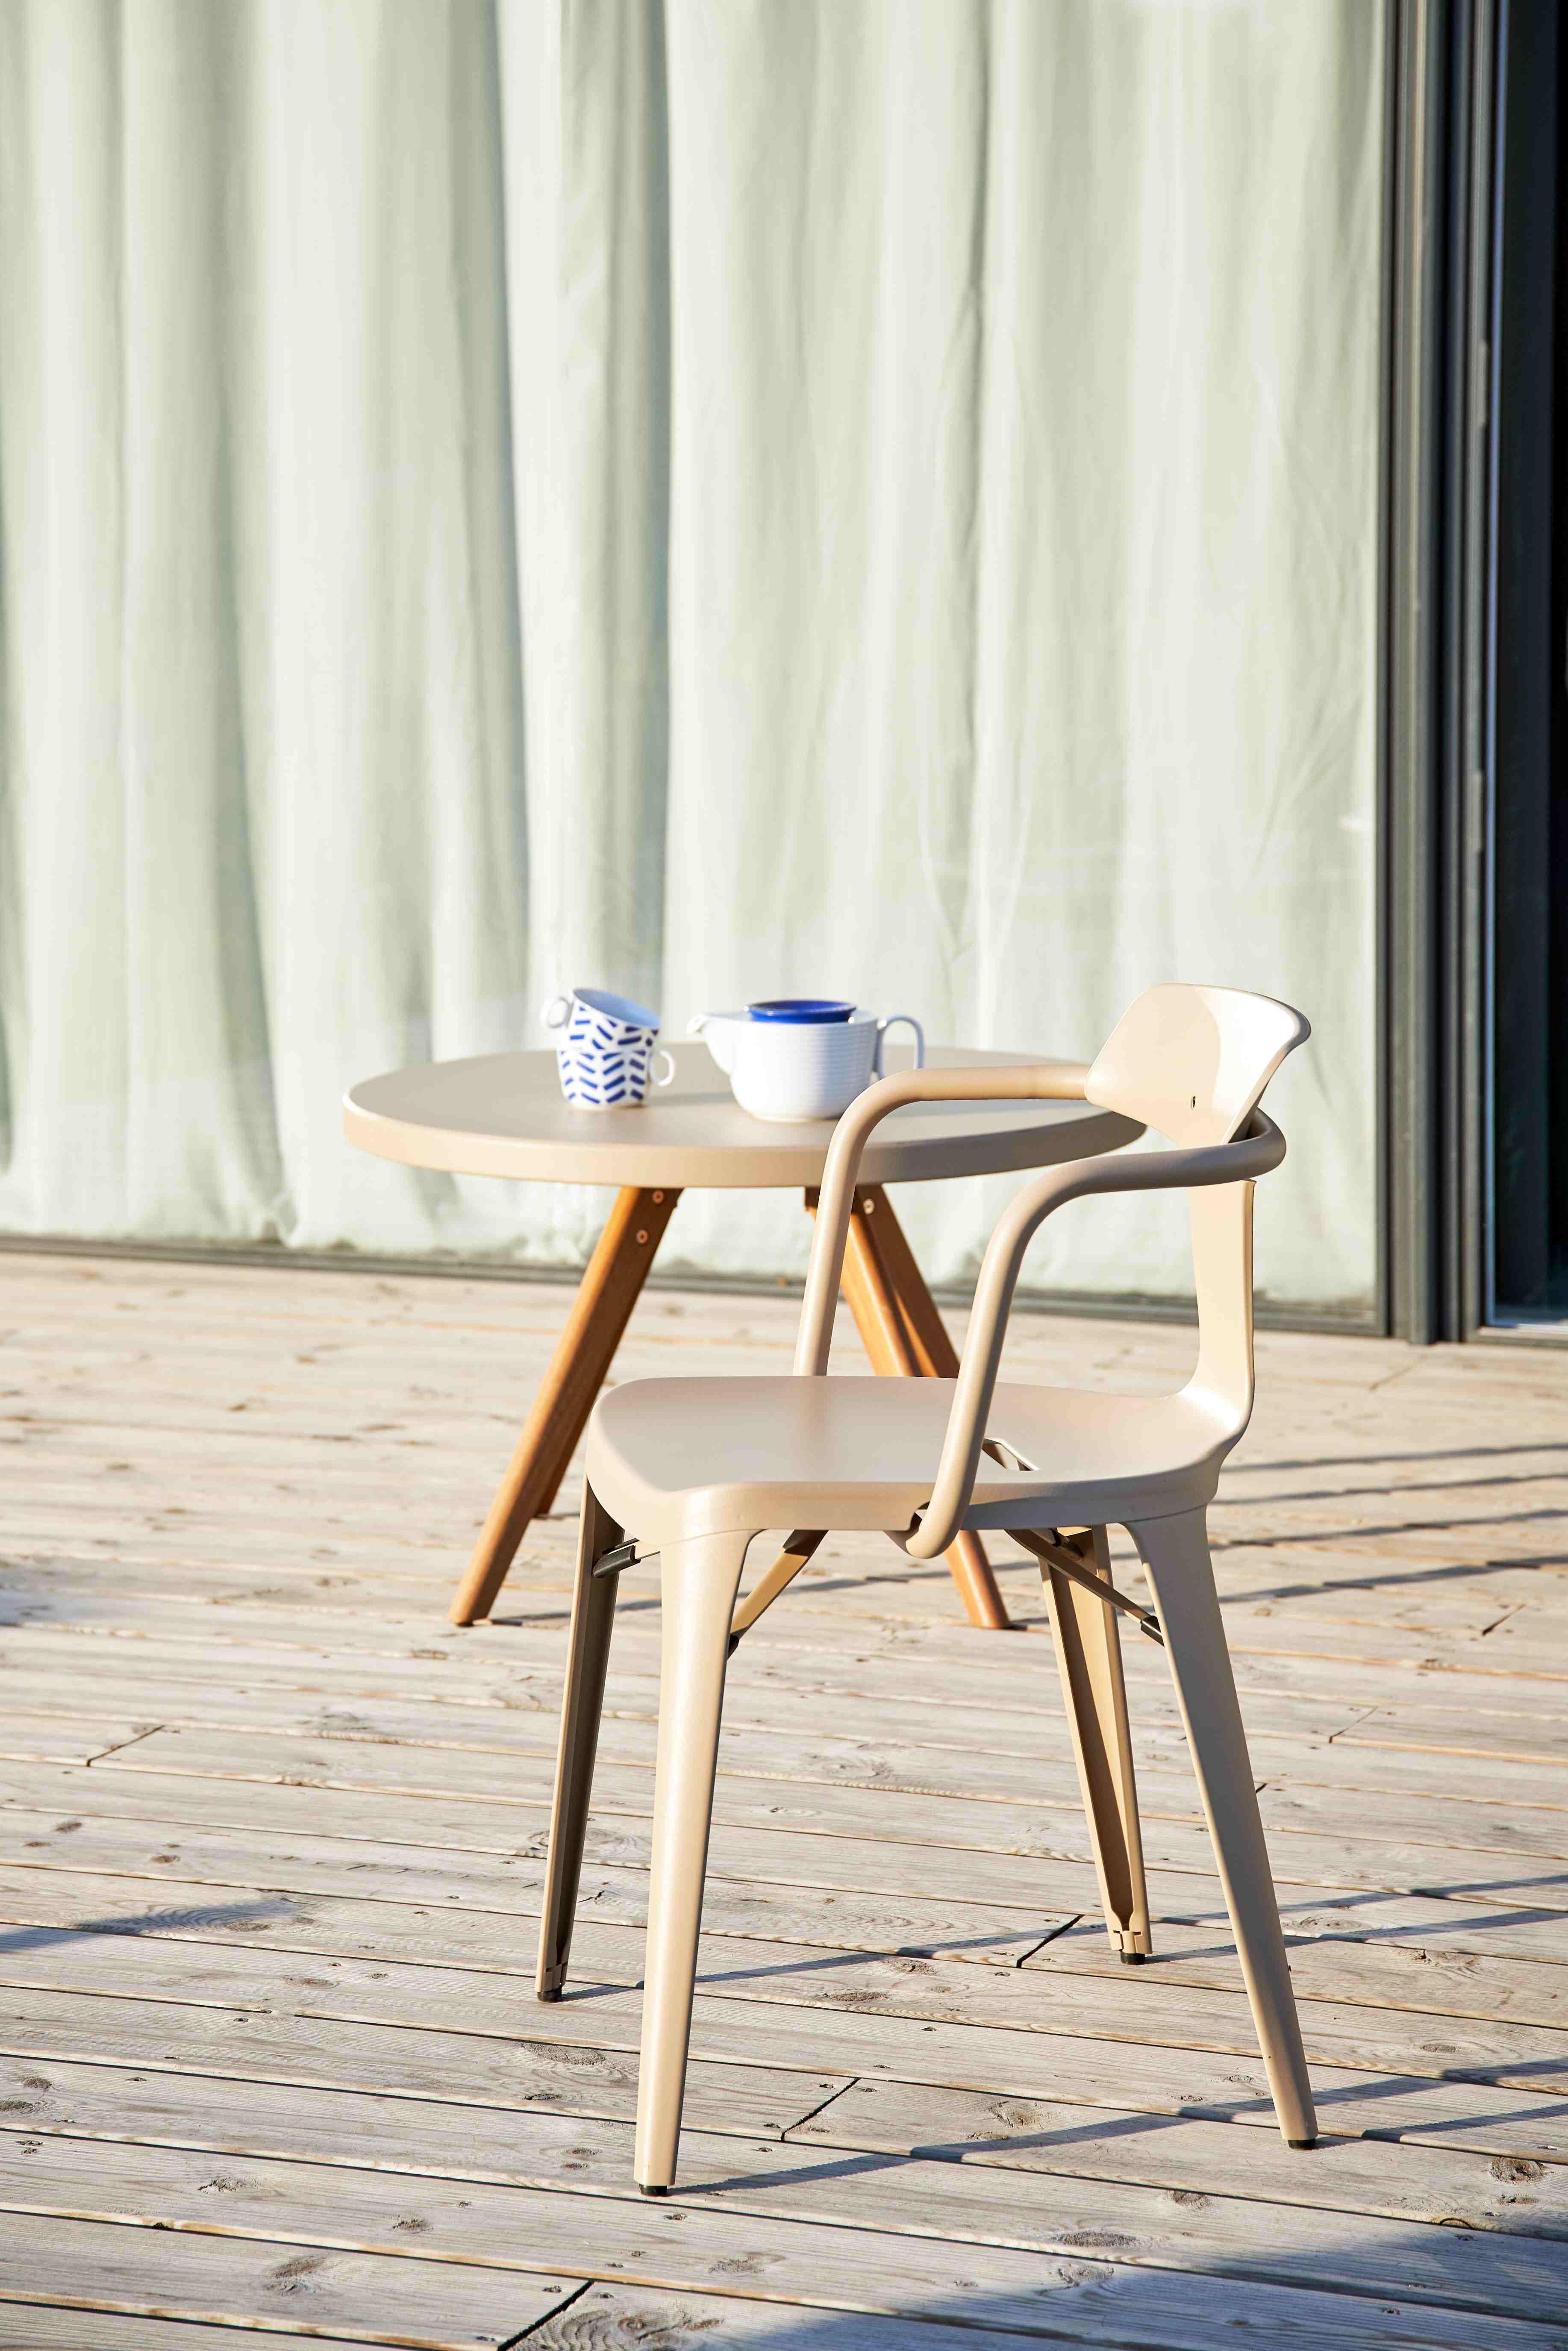 Painted T14 Chair Outdoor - Stainless Steel in Graphite by Patrick Norguet and Tolix, US For Sale